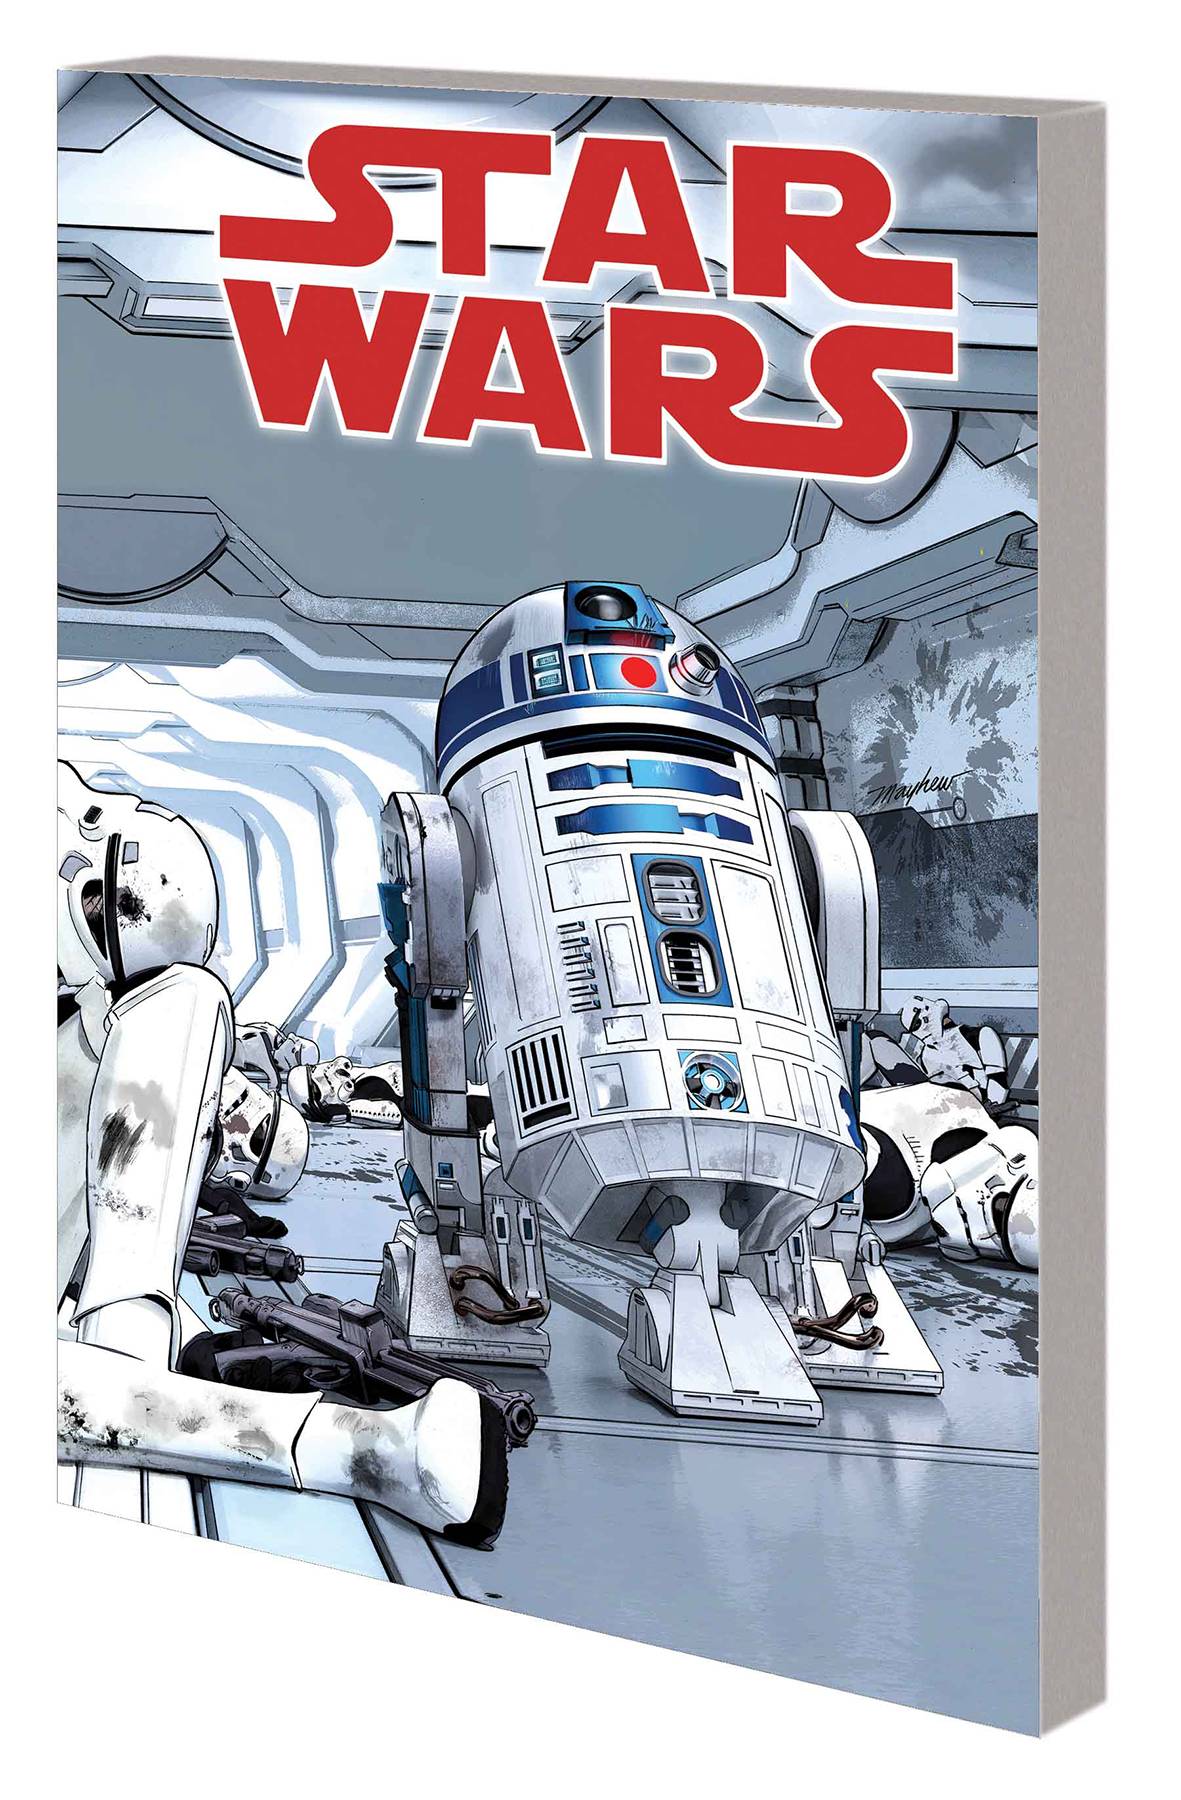 Star Wars Graphic Novel Volume 6 Out Among The Stars